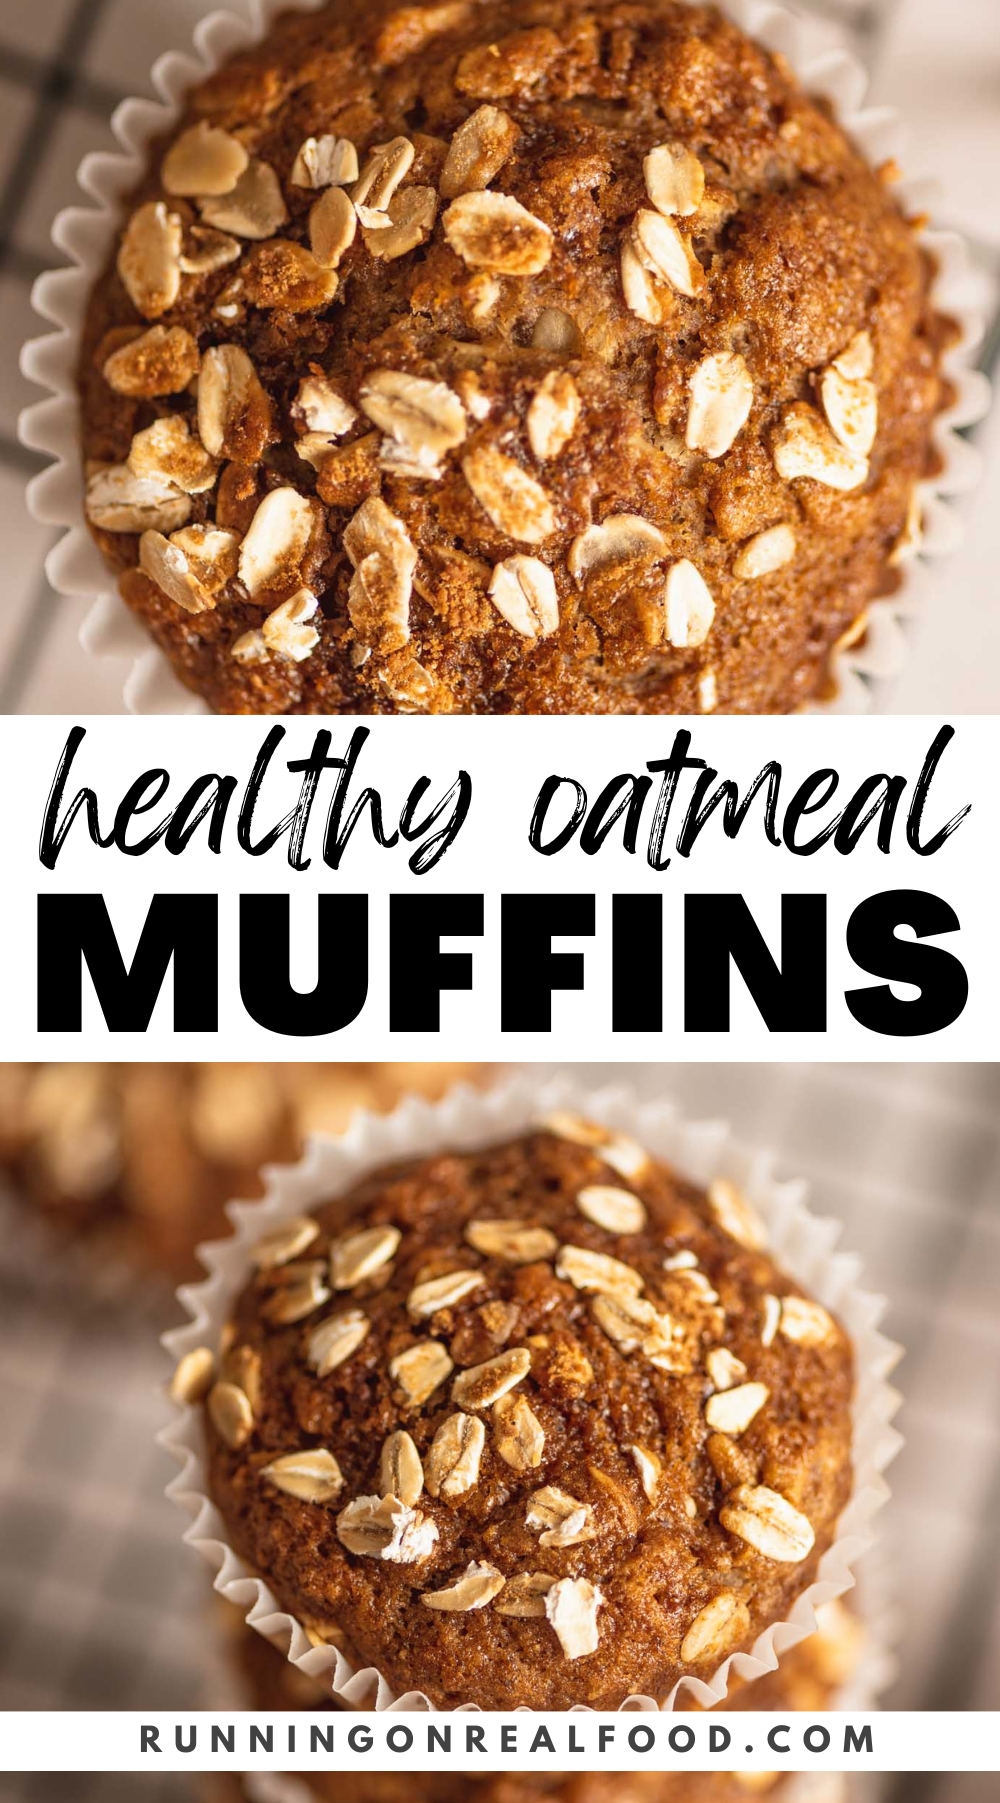 Easy and Healthy Oatmeal Muffins Recipe (Vegan)